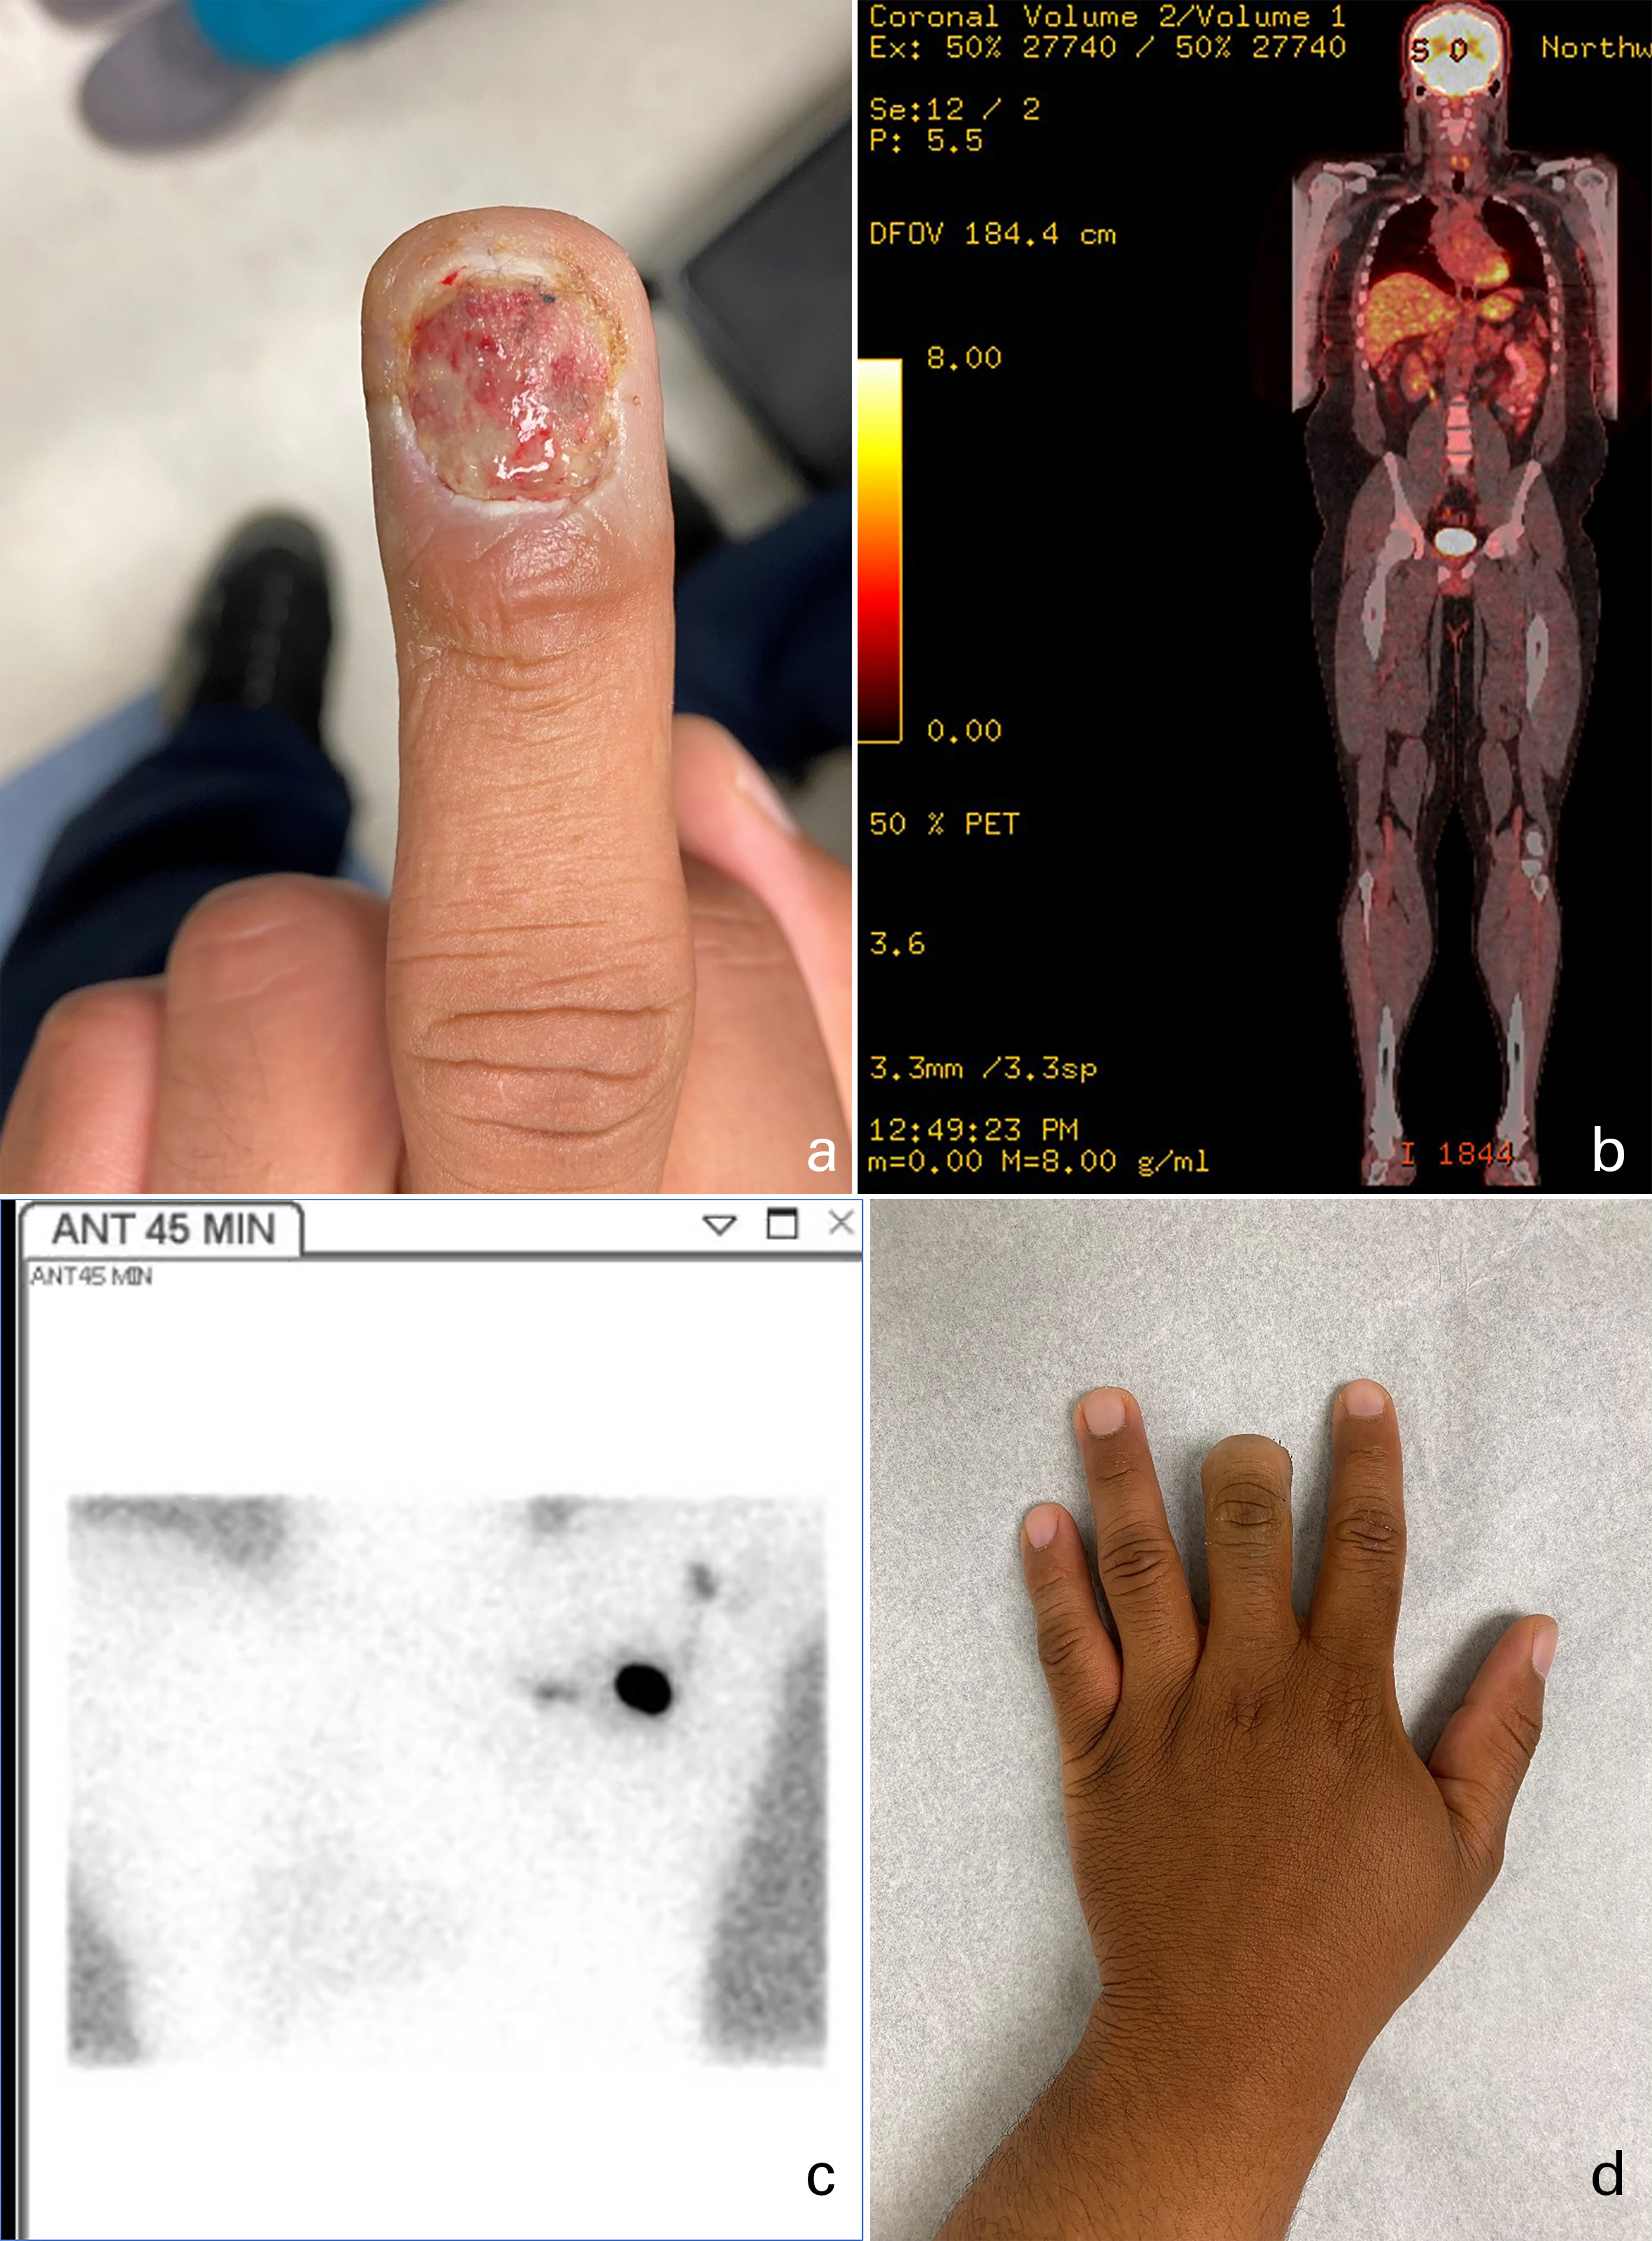 Fig. 4 
          31-year-old male with high-grade malignant melanoma of the left long finger, prioritized as level III. a) Gross image, 16 March 2020. b) Preoperative coronal positron emission tomography scan, negative for systemic pathological fluorodeoxyglucose uptake, 25 March 2020. c) Lymphoscintigraphy on the day of surgery (20 May 2020), demonstrating left axillary and pectoral nodal accumulation of radiopharmaceutical material. d) Postoperative gross image. Final pathology of the axillary lymph node was positive for malignant melanoma. Due to COVID-19 related delays, this patient may have experienced increased systemic tumour progression.
        